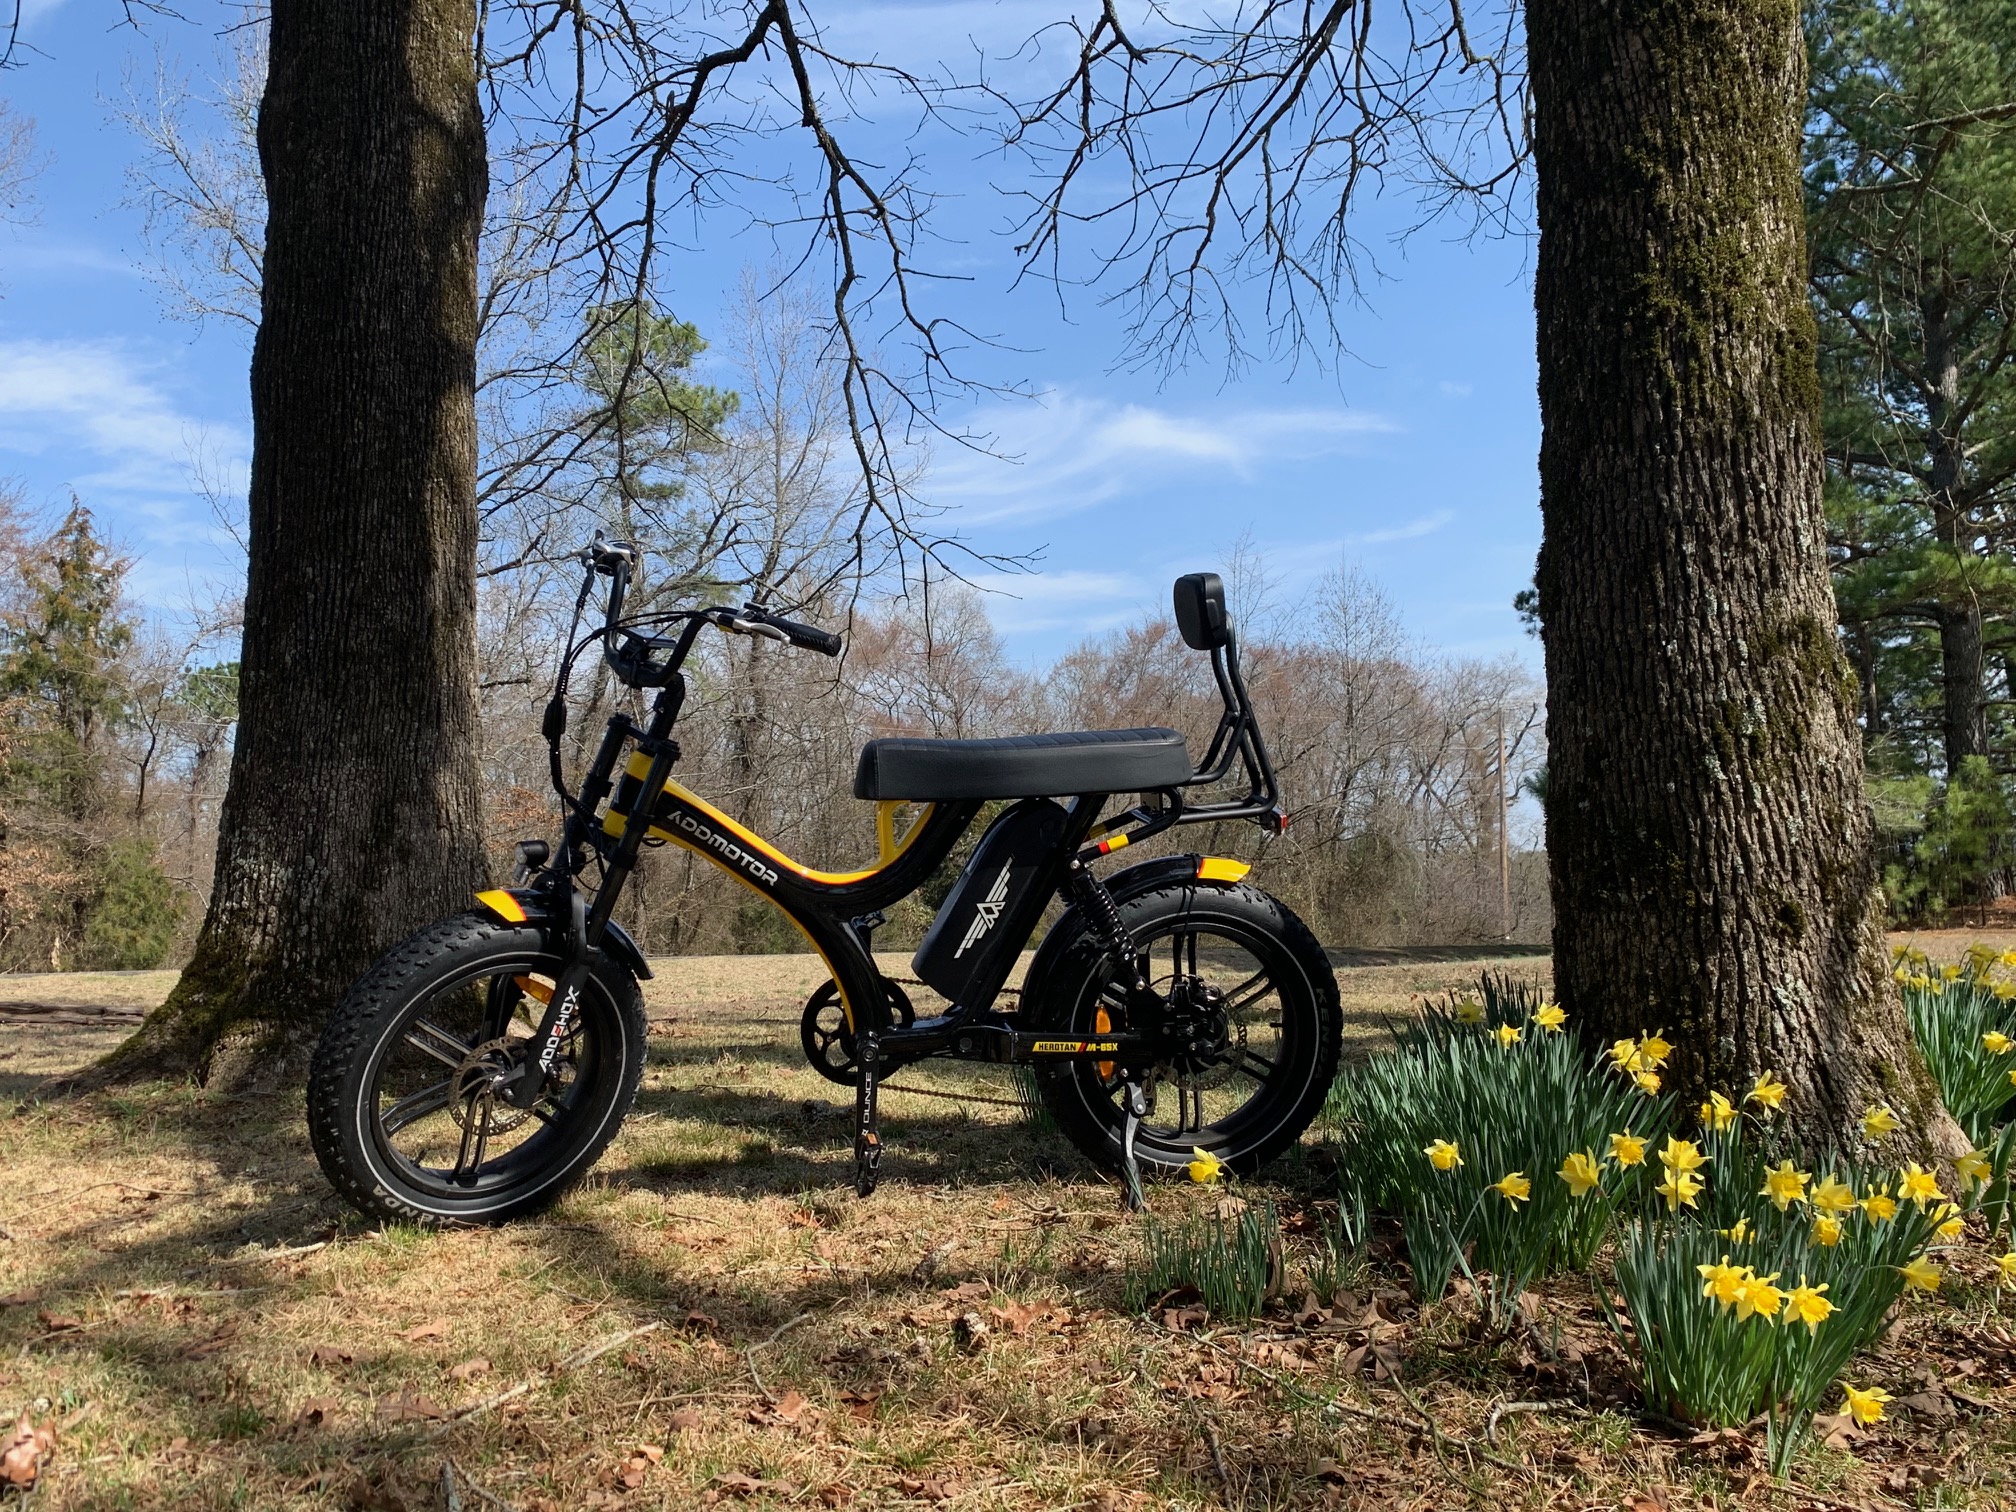 Review on Addmotor HEROTAN M-65X Cruiser Ebike - make your adventure fun and safe!